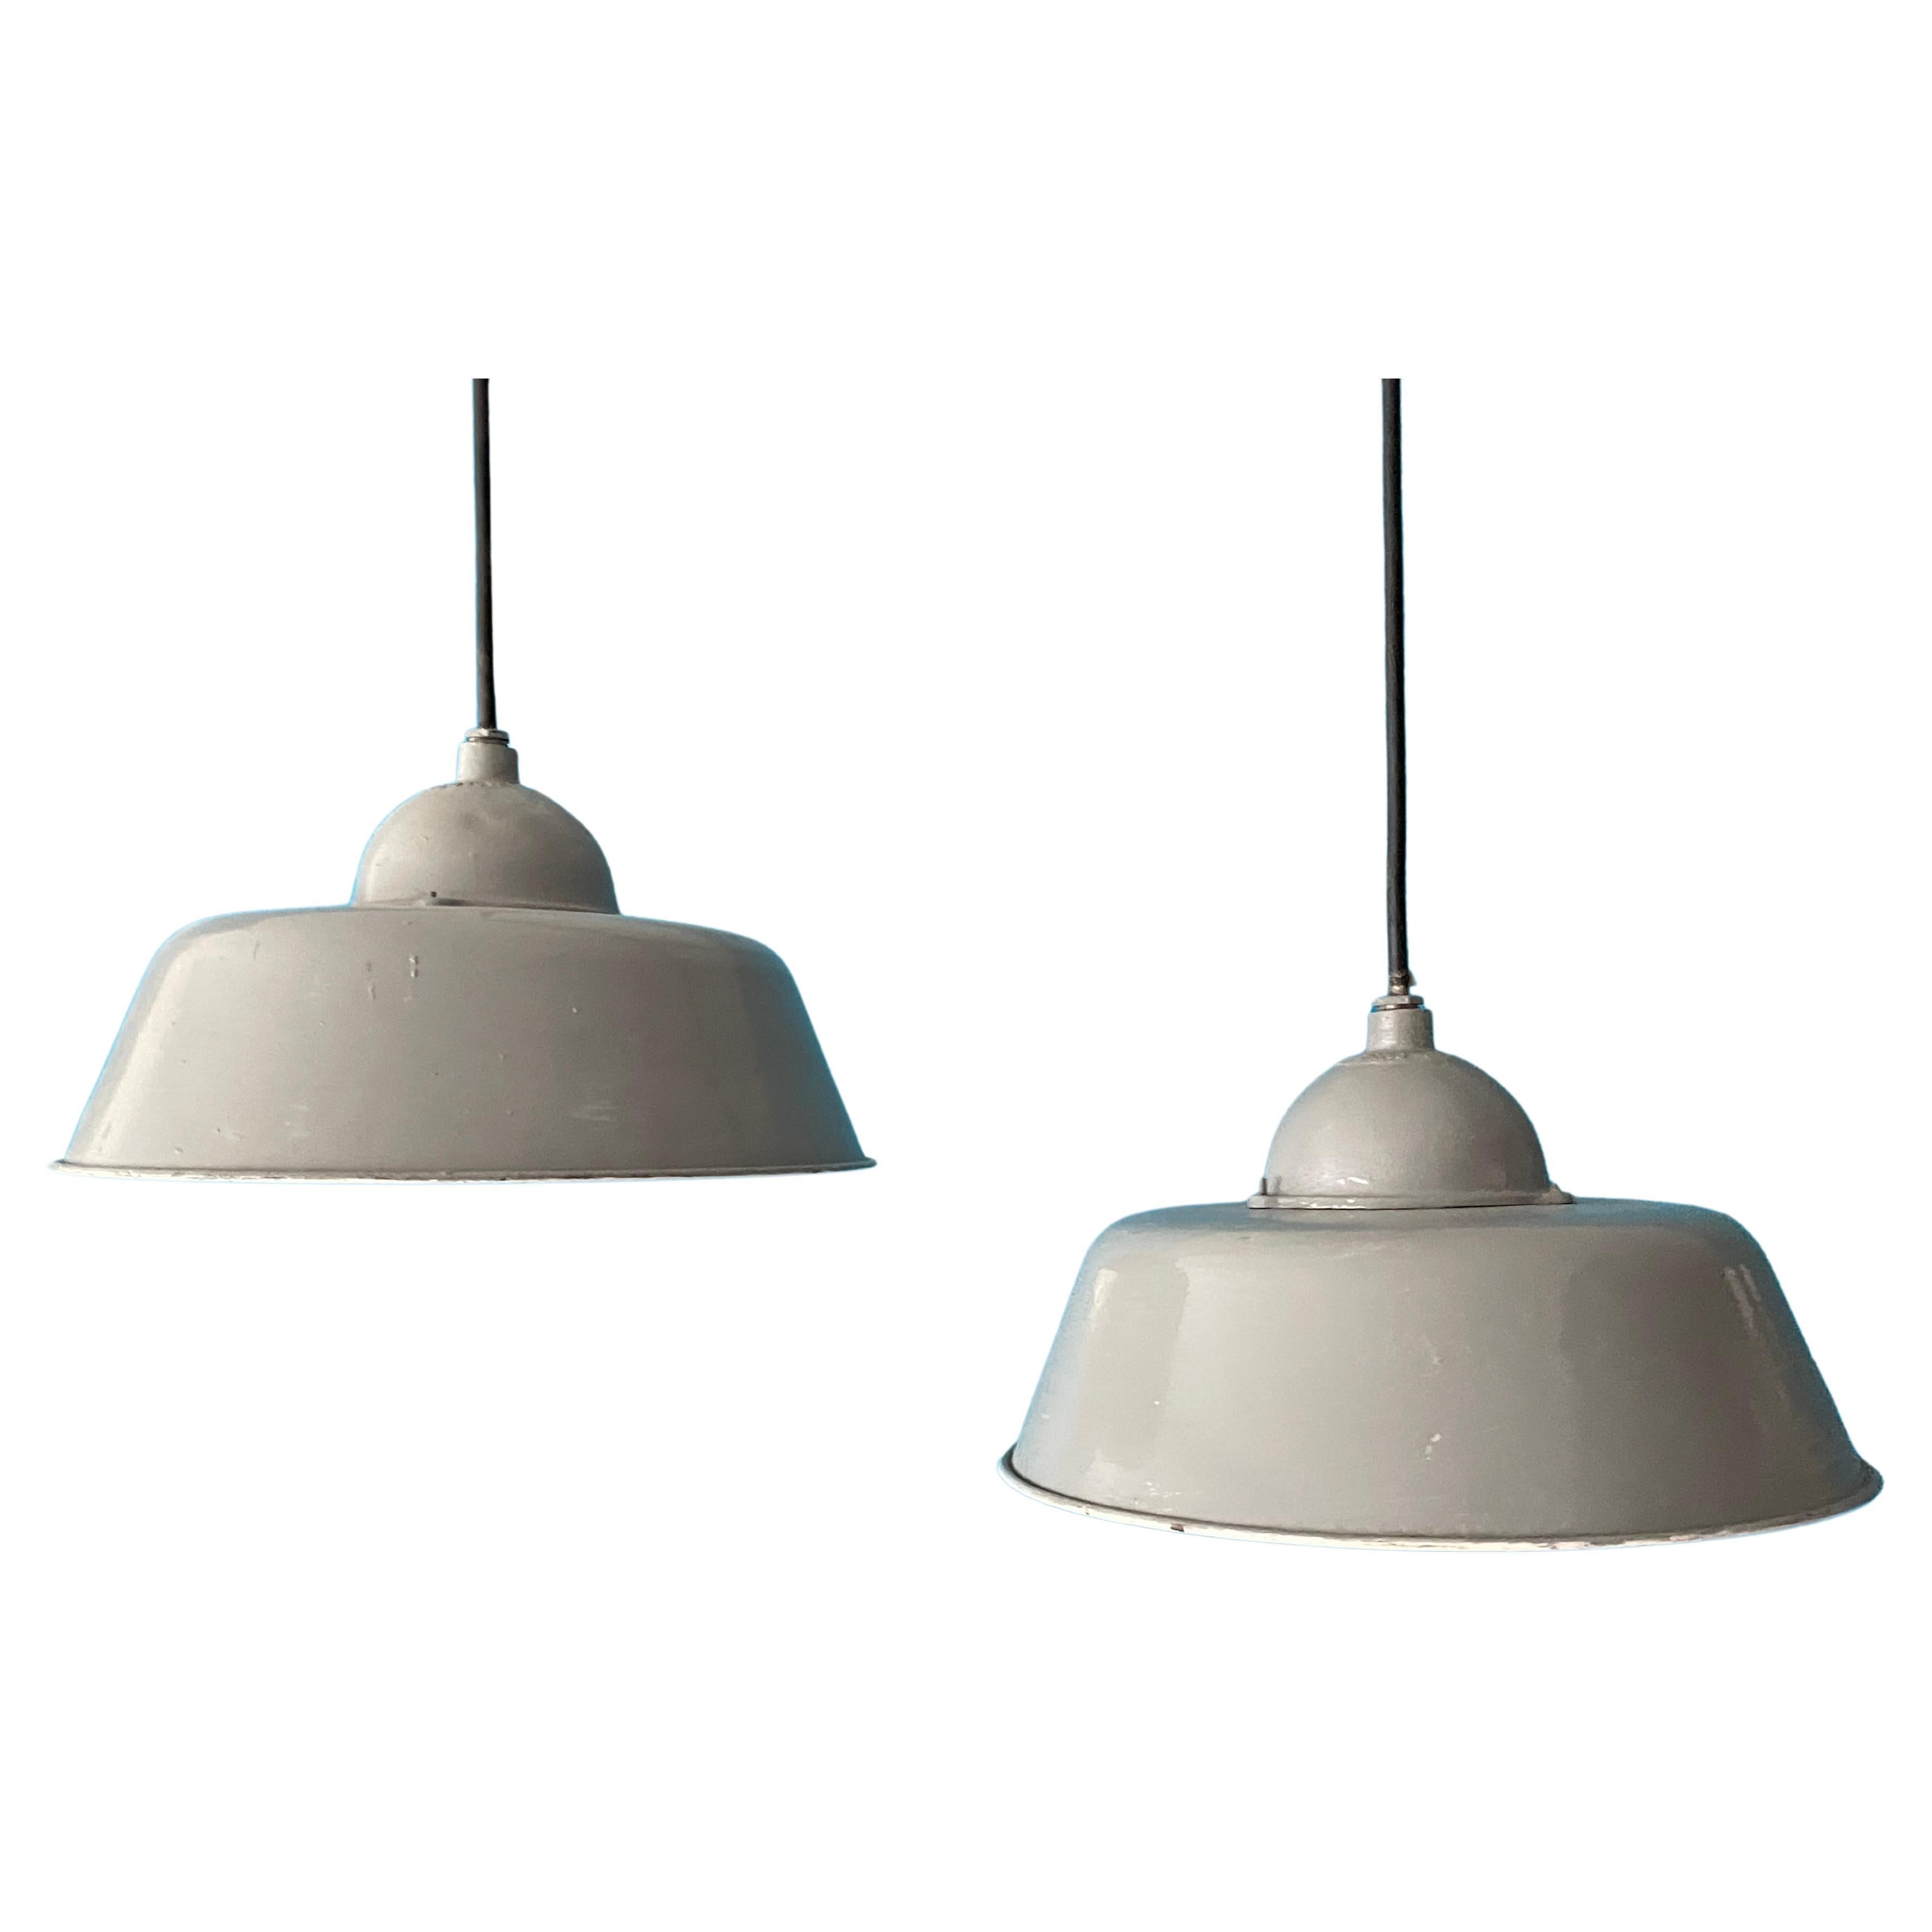 Pair of Vintage Industrial Pendant Lamps, Manufactured by Orno Finland